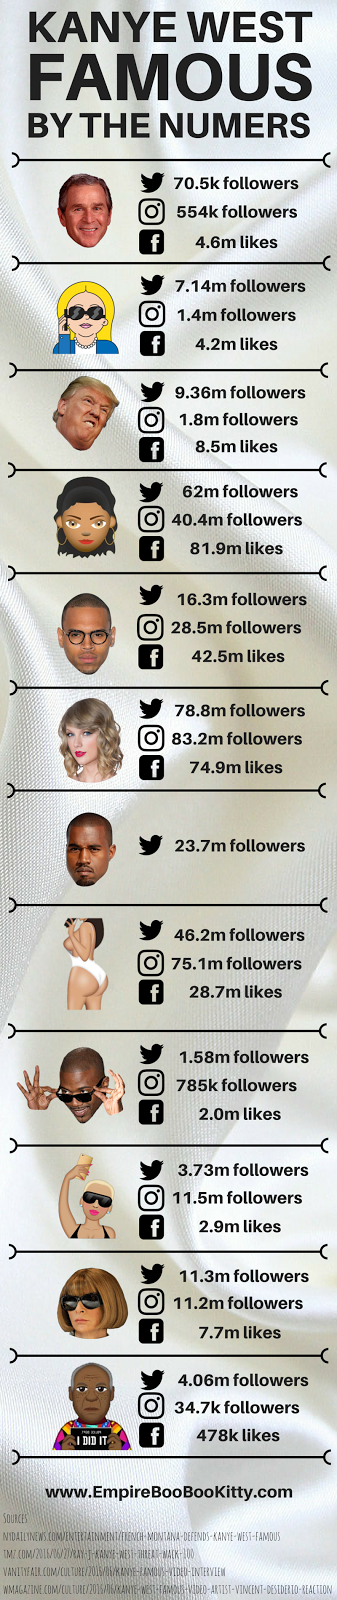 Kanye West Famous Infographic